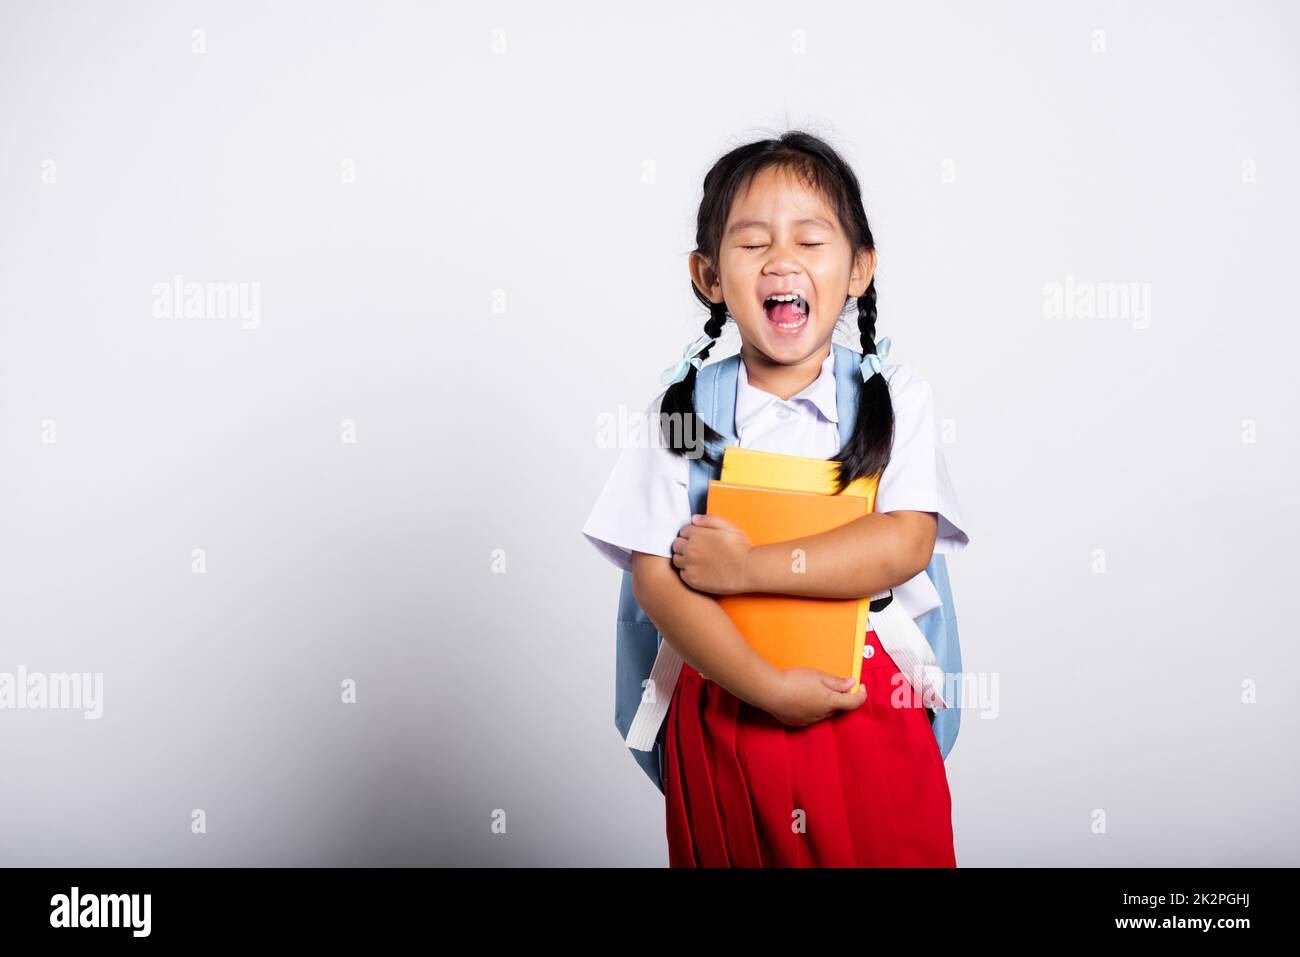 Asian adorable toddler smiling happy wear student thai uniform red skirt stand hold or hugging book Stock Photo